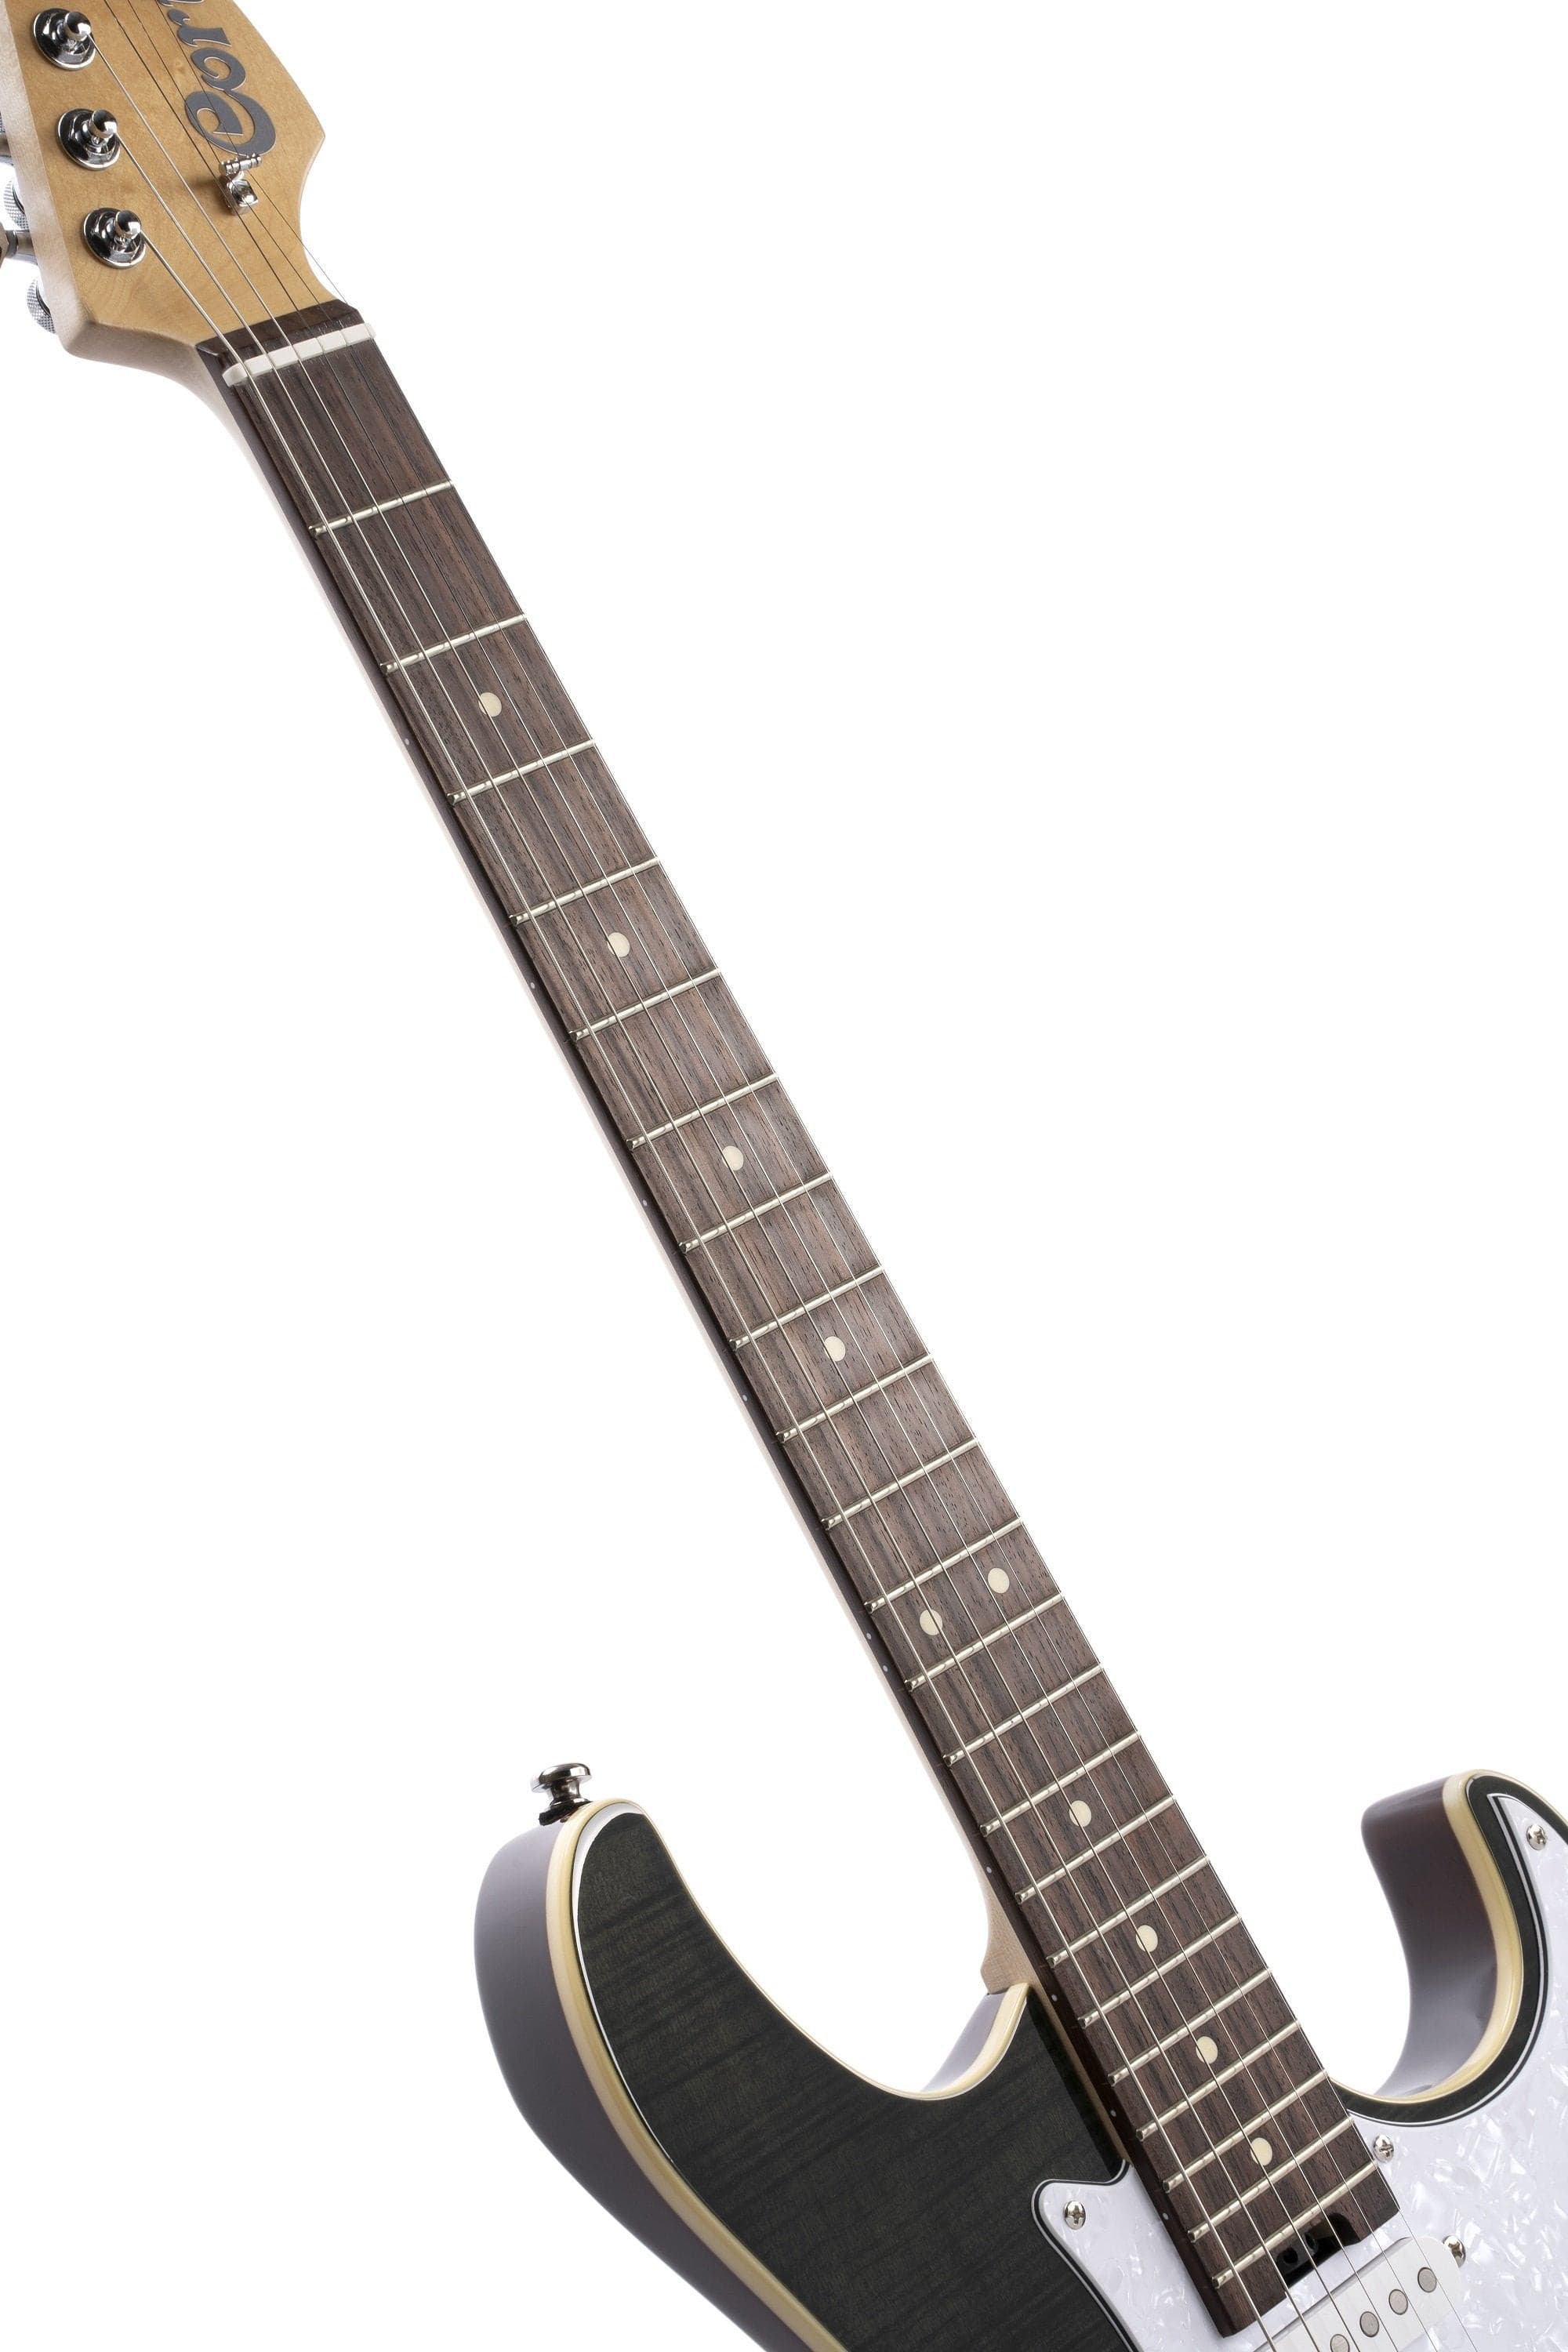 Cort G280 Select Trans Black, Electric Guitar for sale at Richards Guitars.